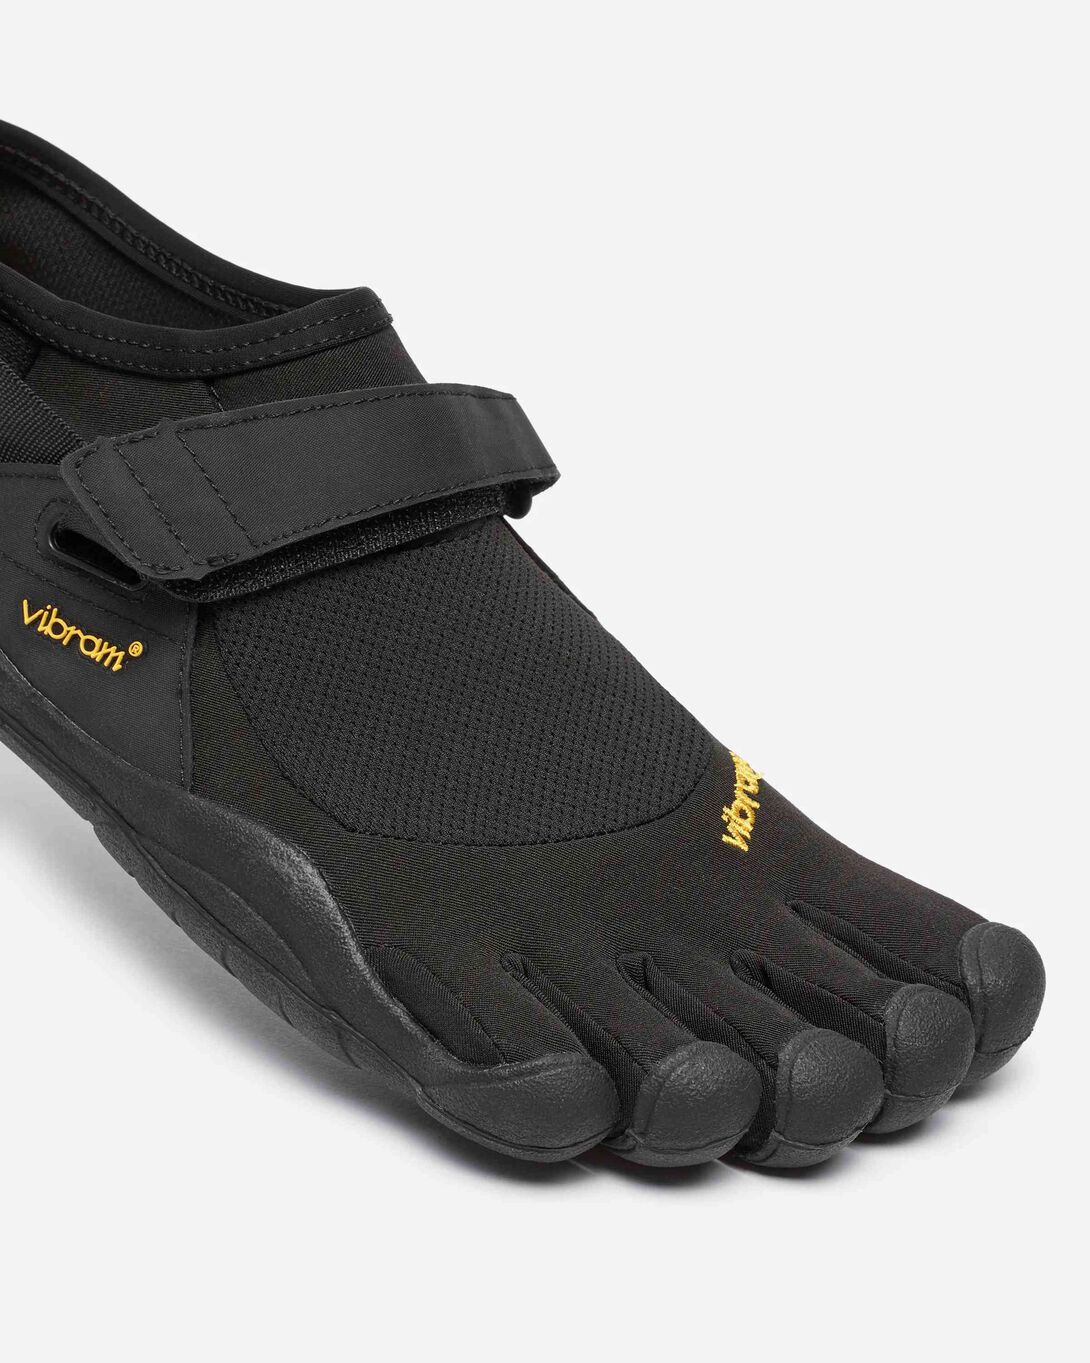 Review: Vibram FiveFingers KSO and Classic Running Shoes